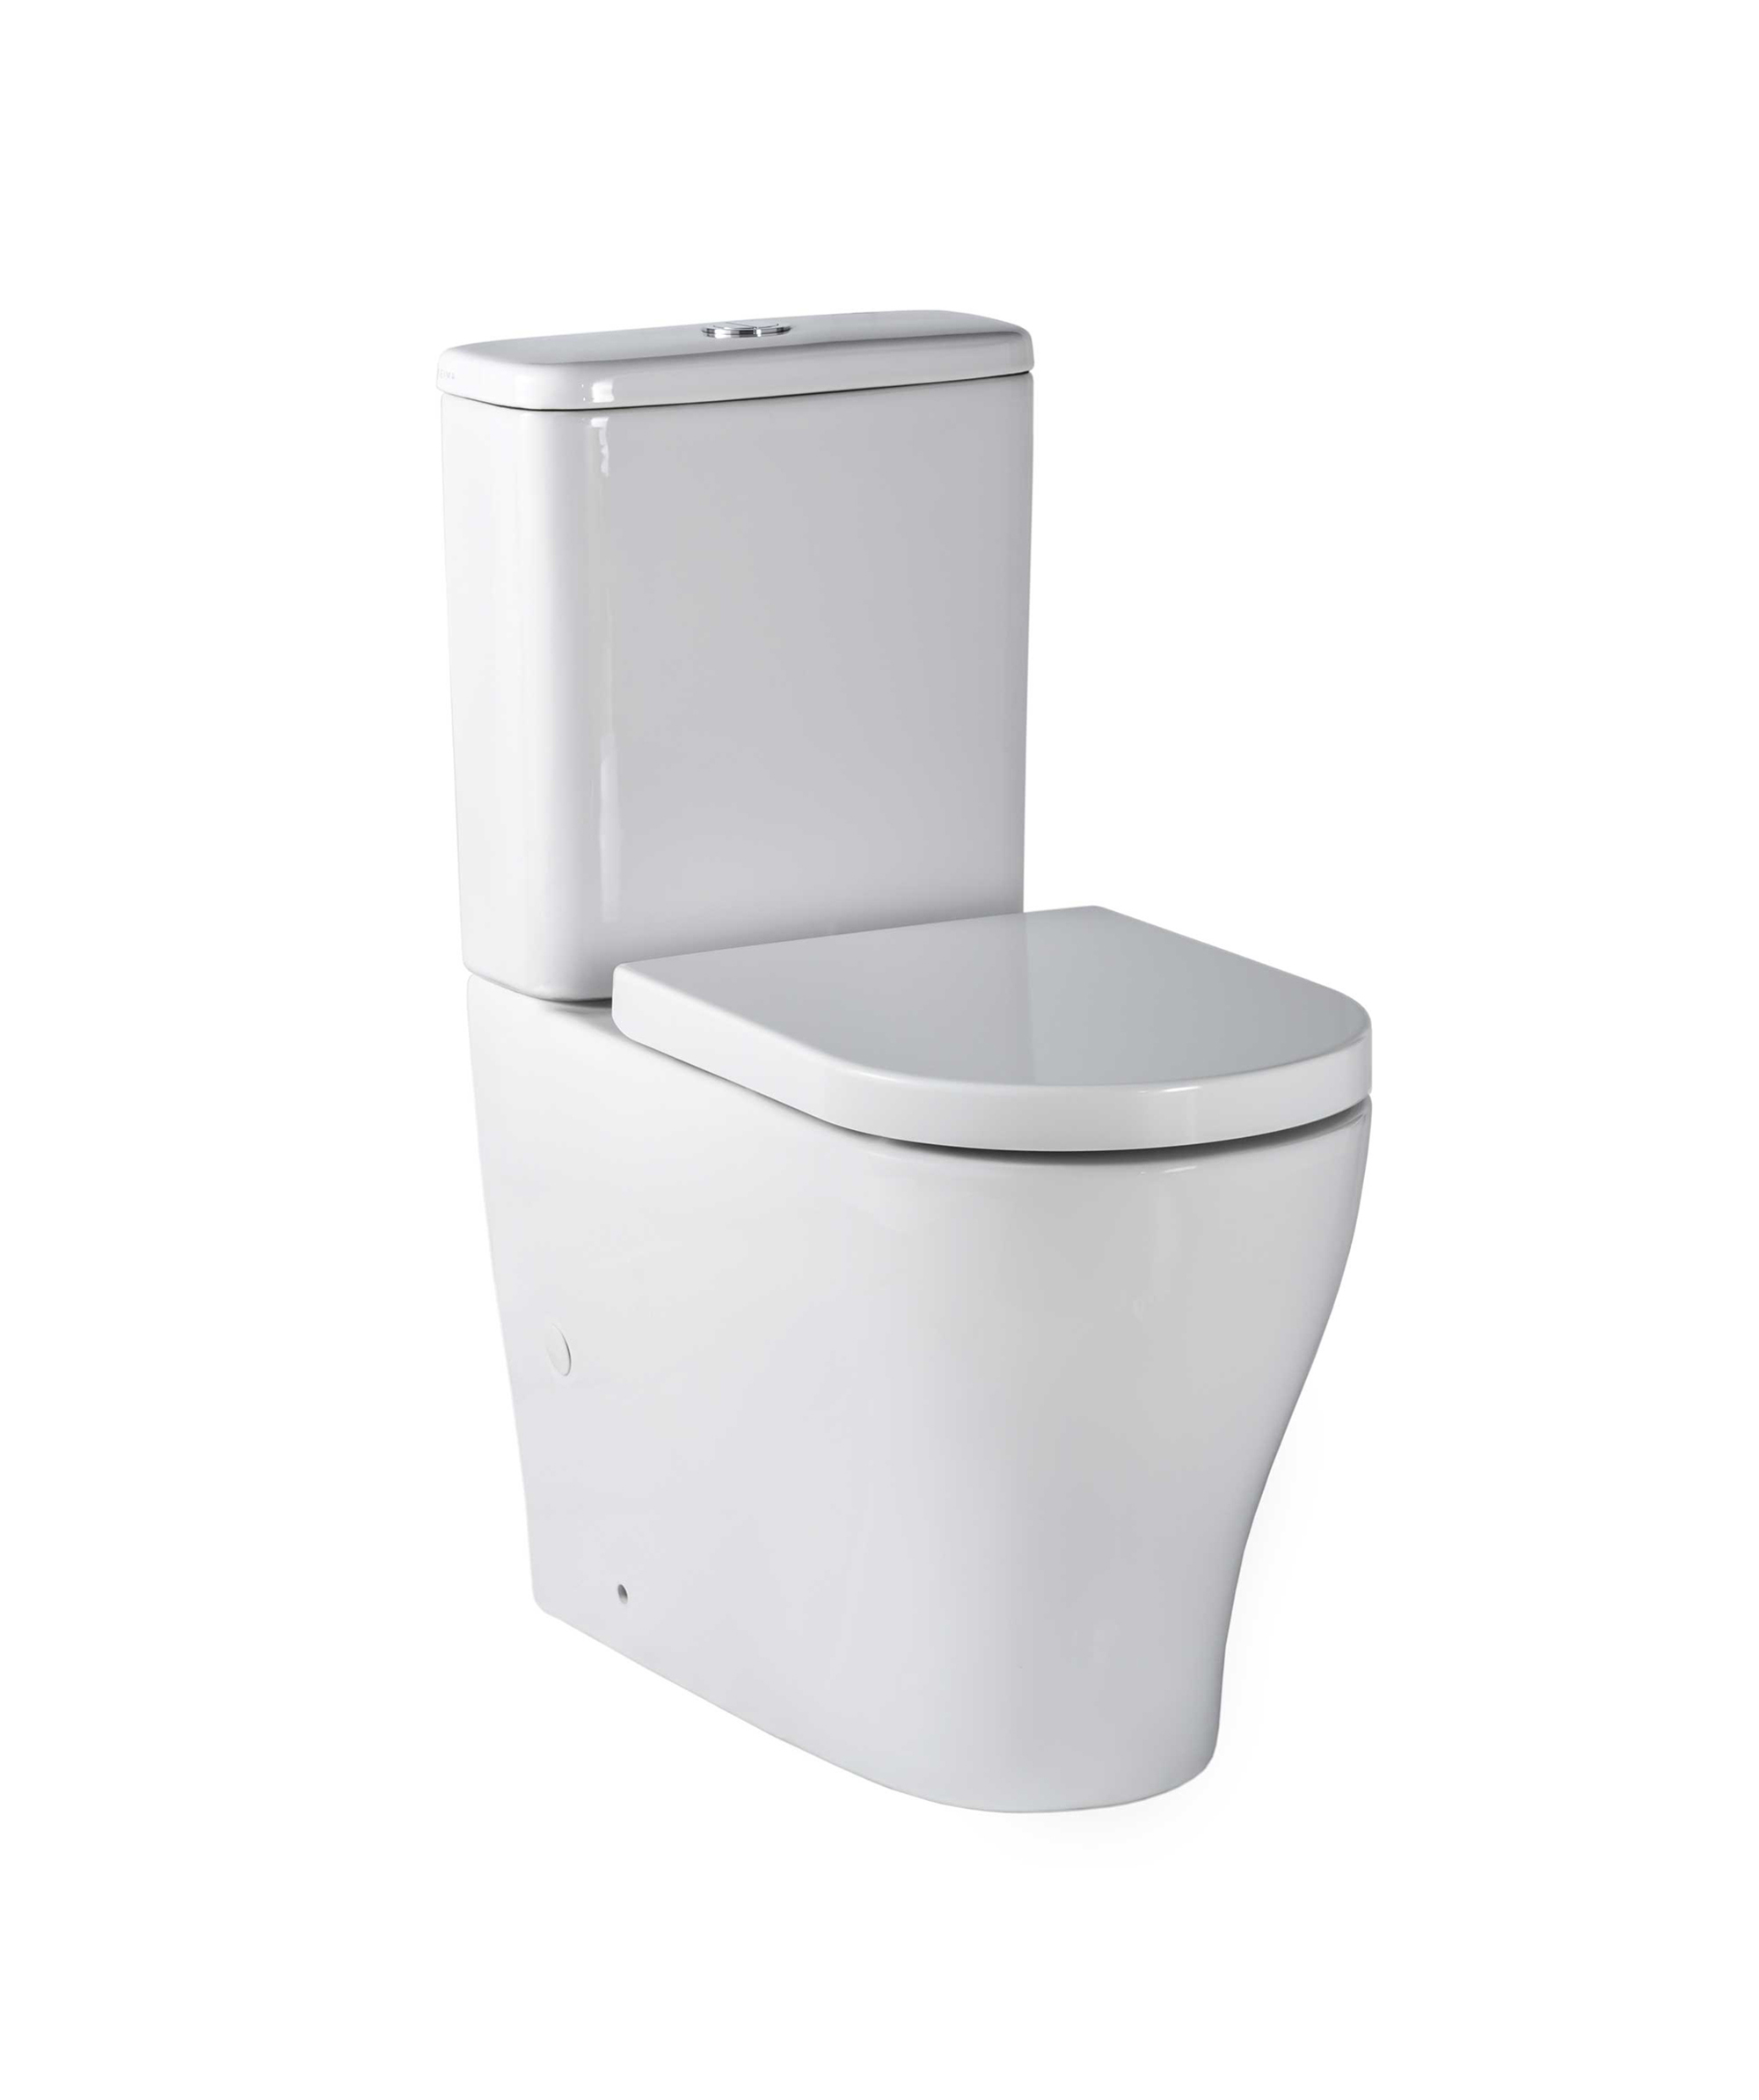 Limni Wall Faced toilet suite - Ambulant compliant - choice of seats